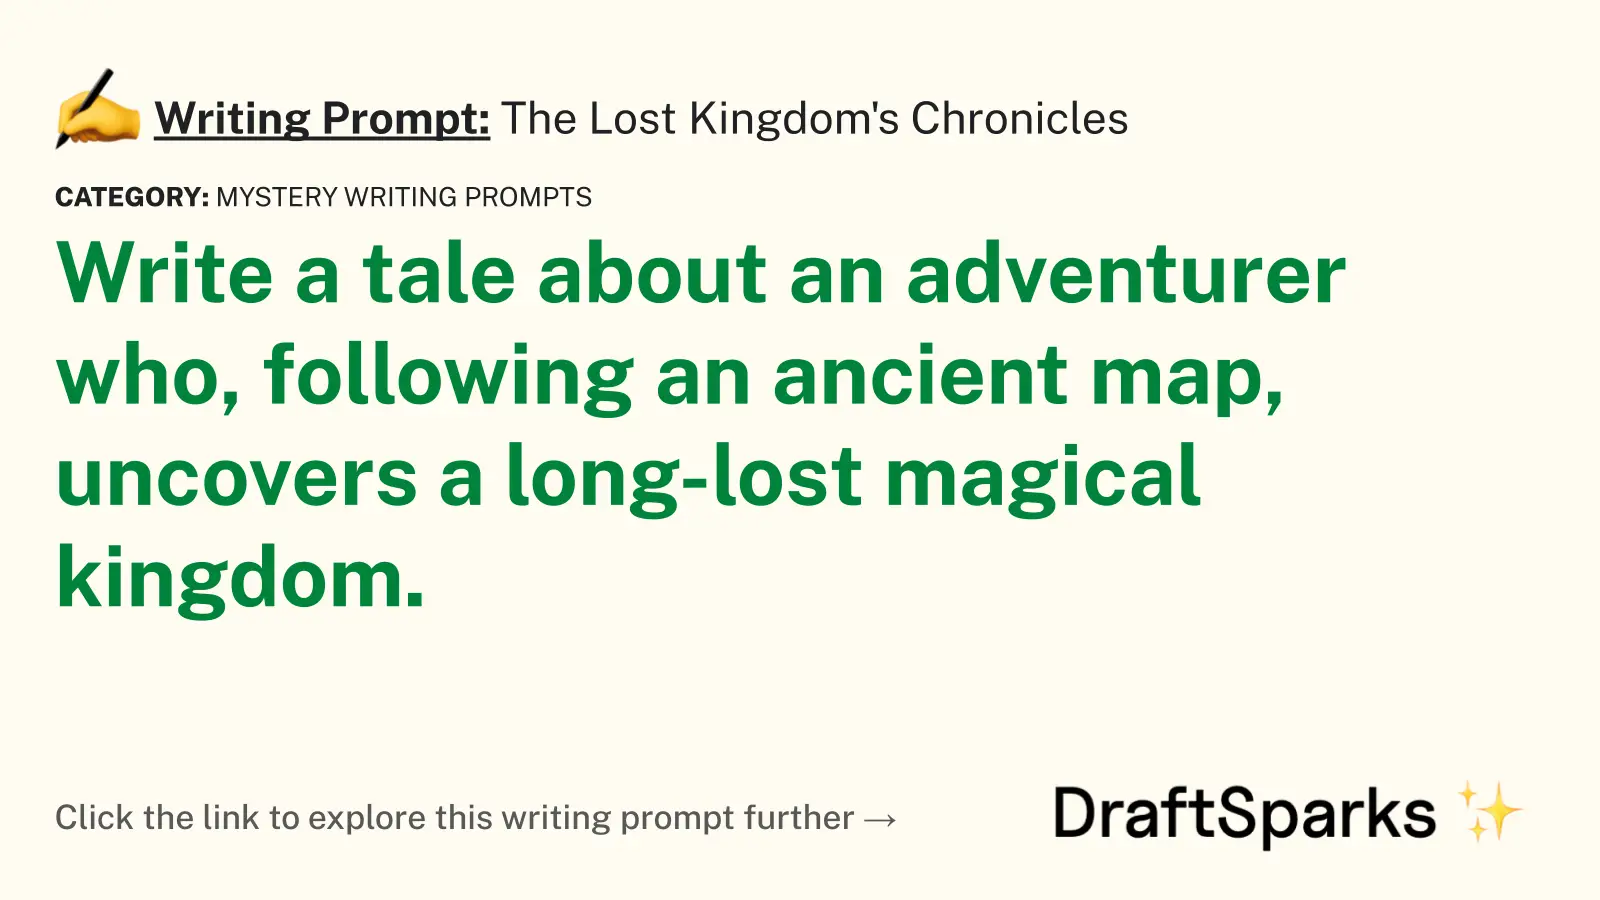 The Lost Kingdom’s Chronicles